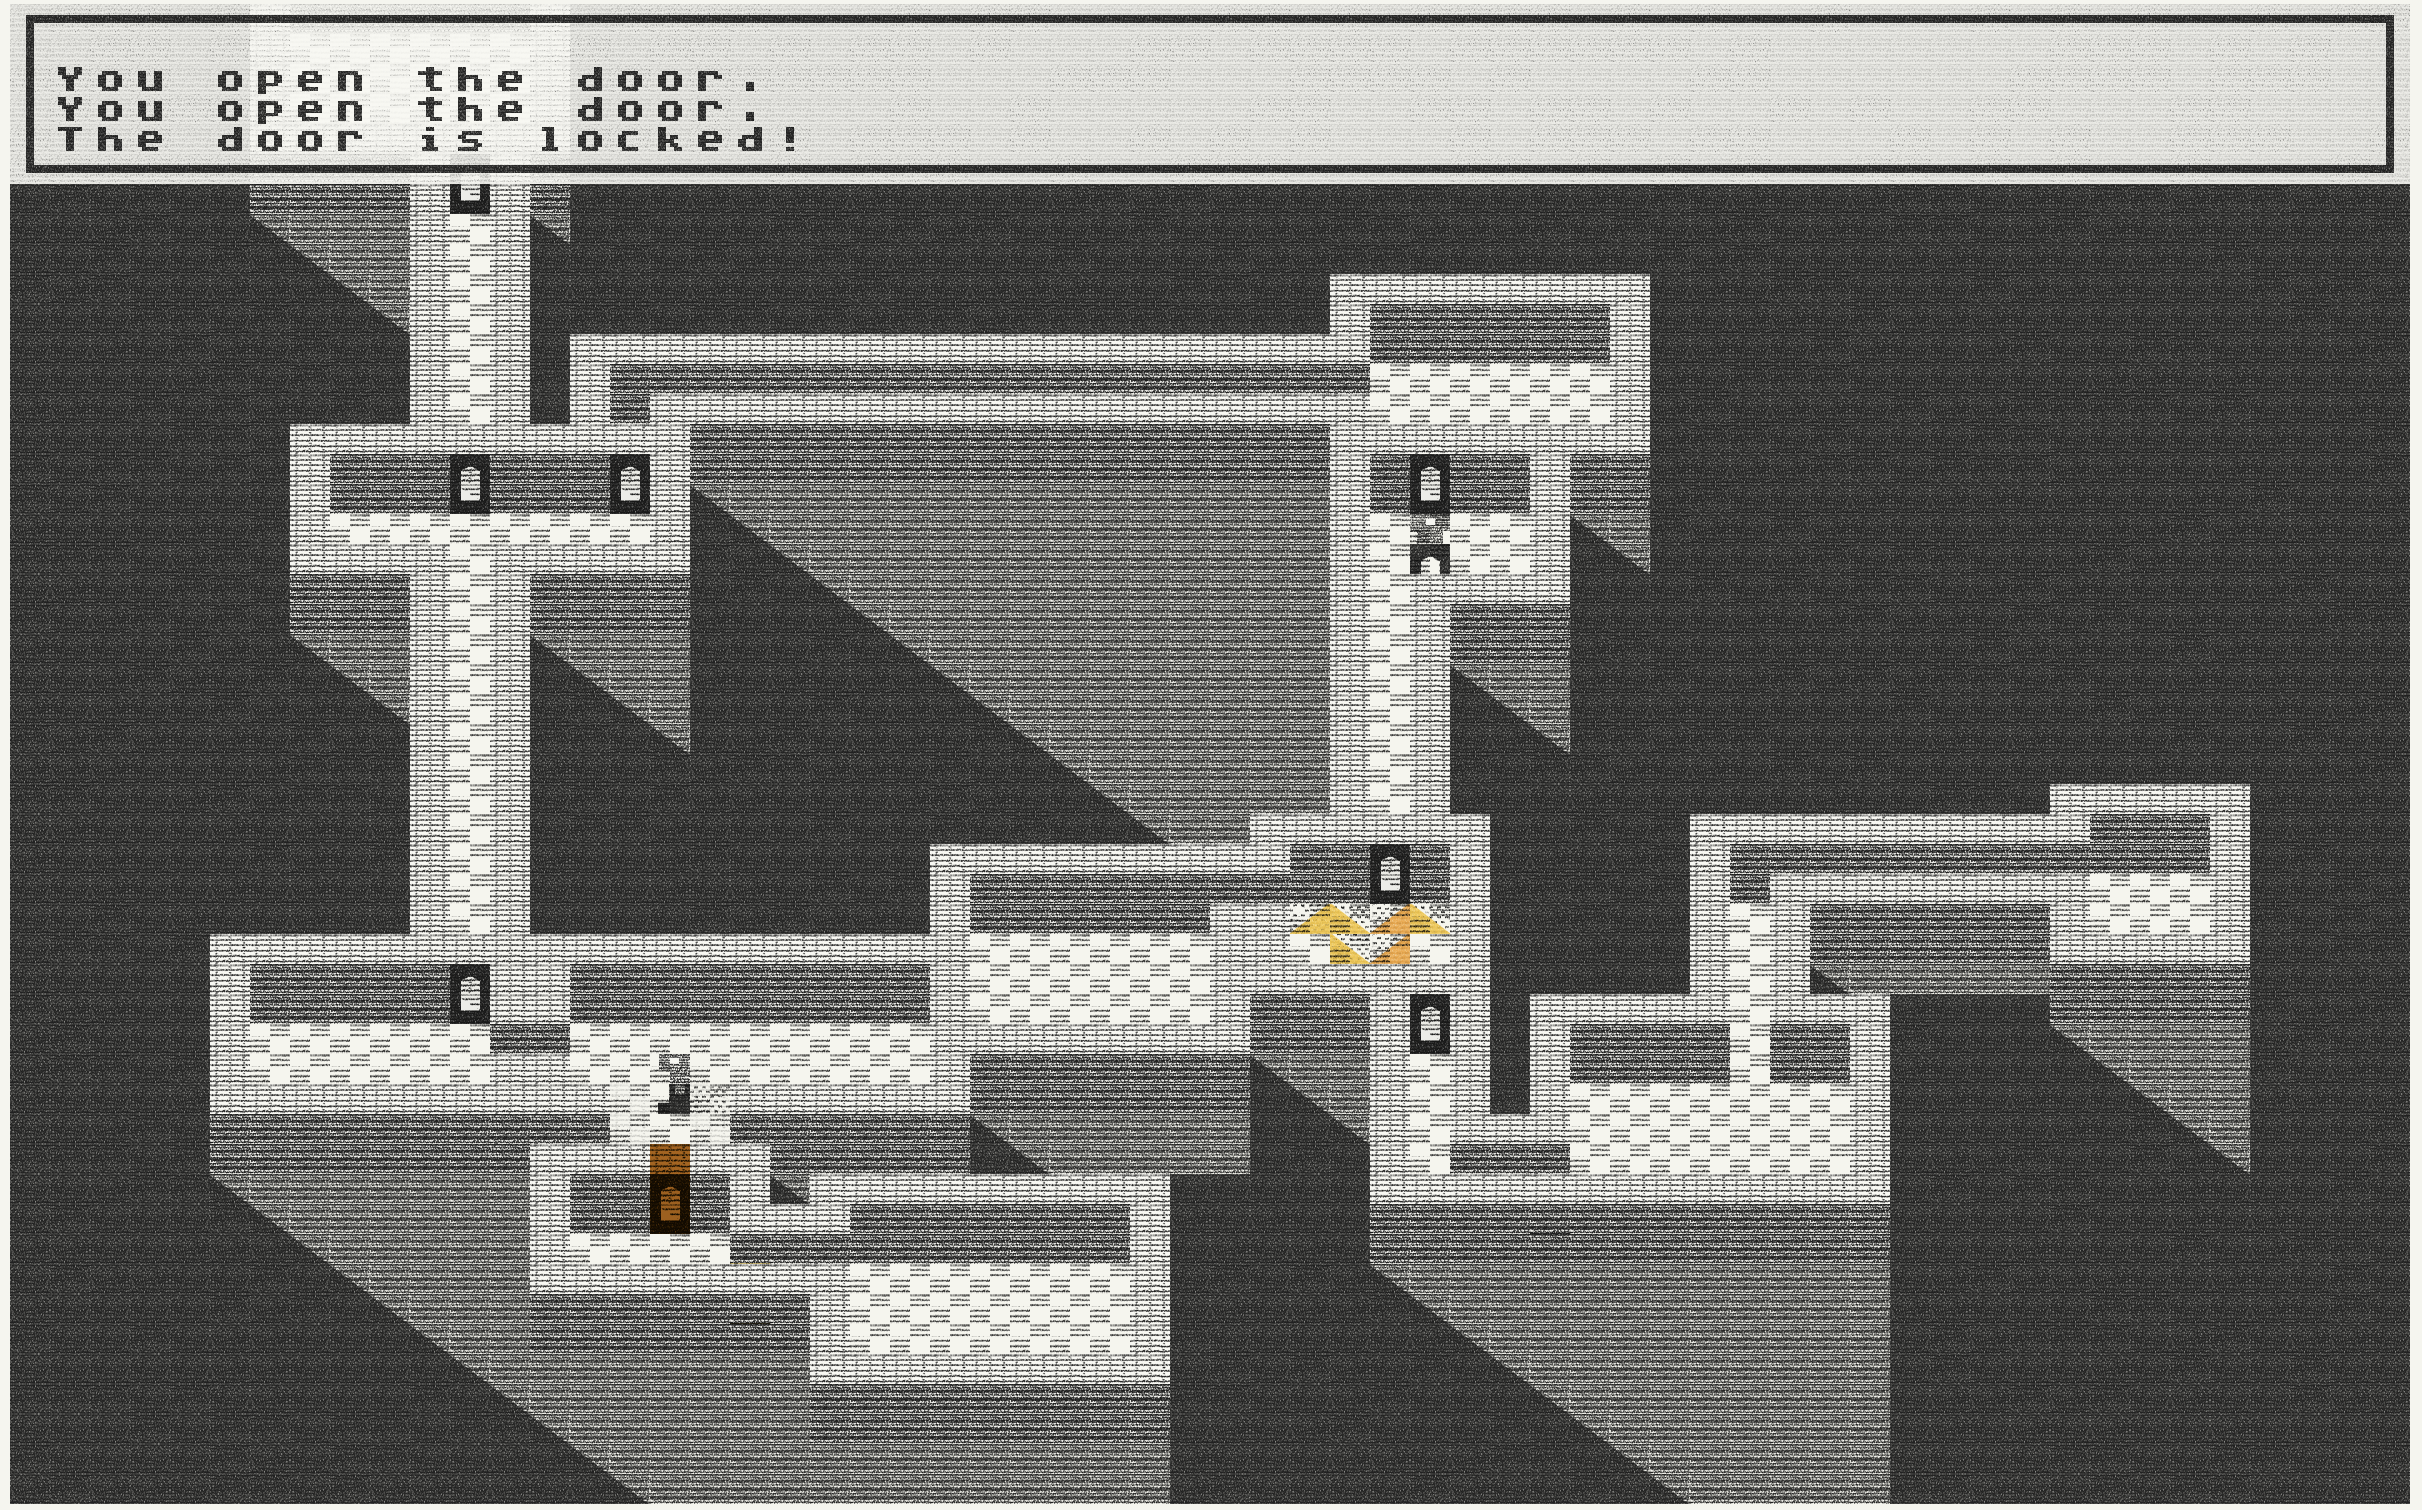 An image of a 2d dungeon game map, text reads "The door is locked!"